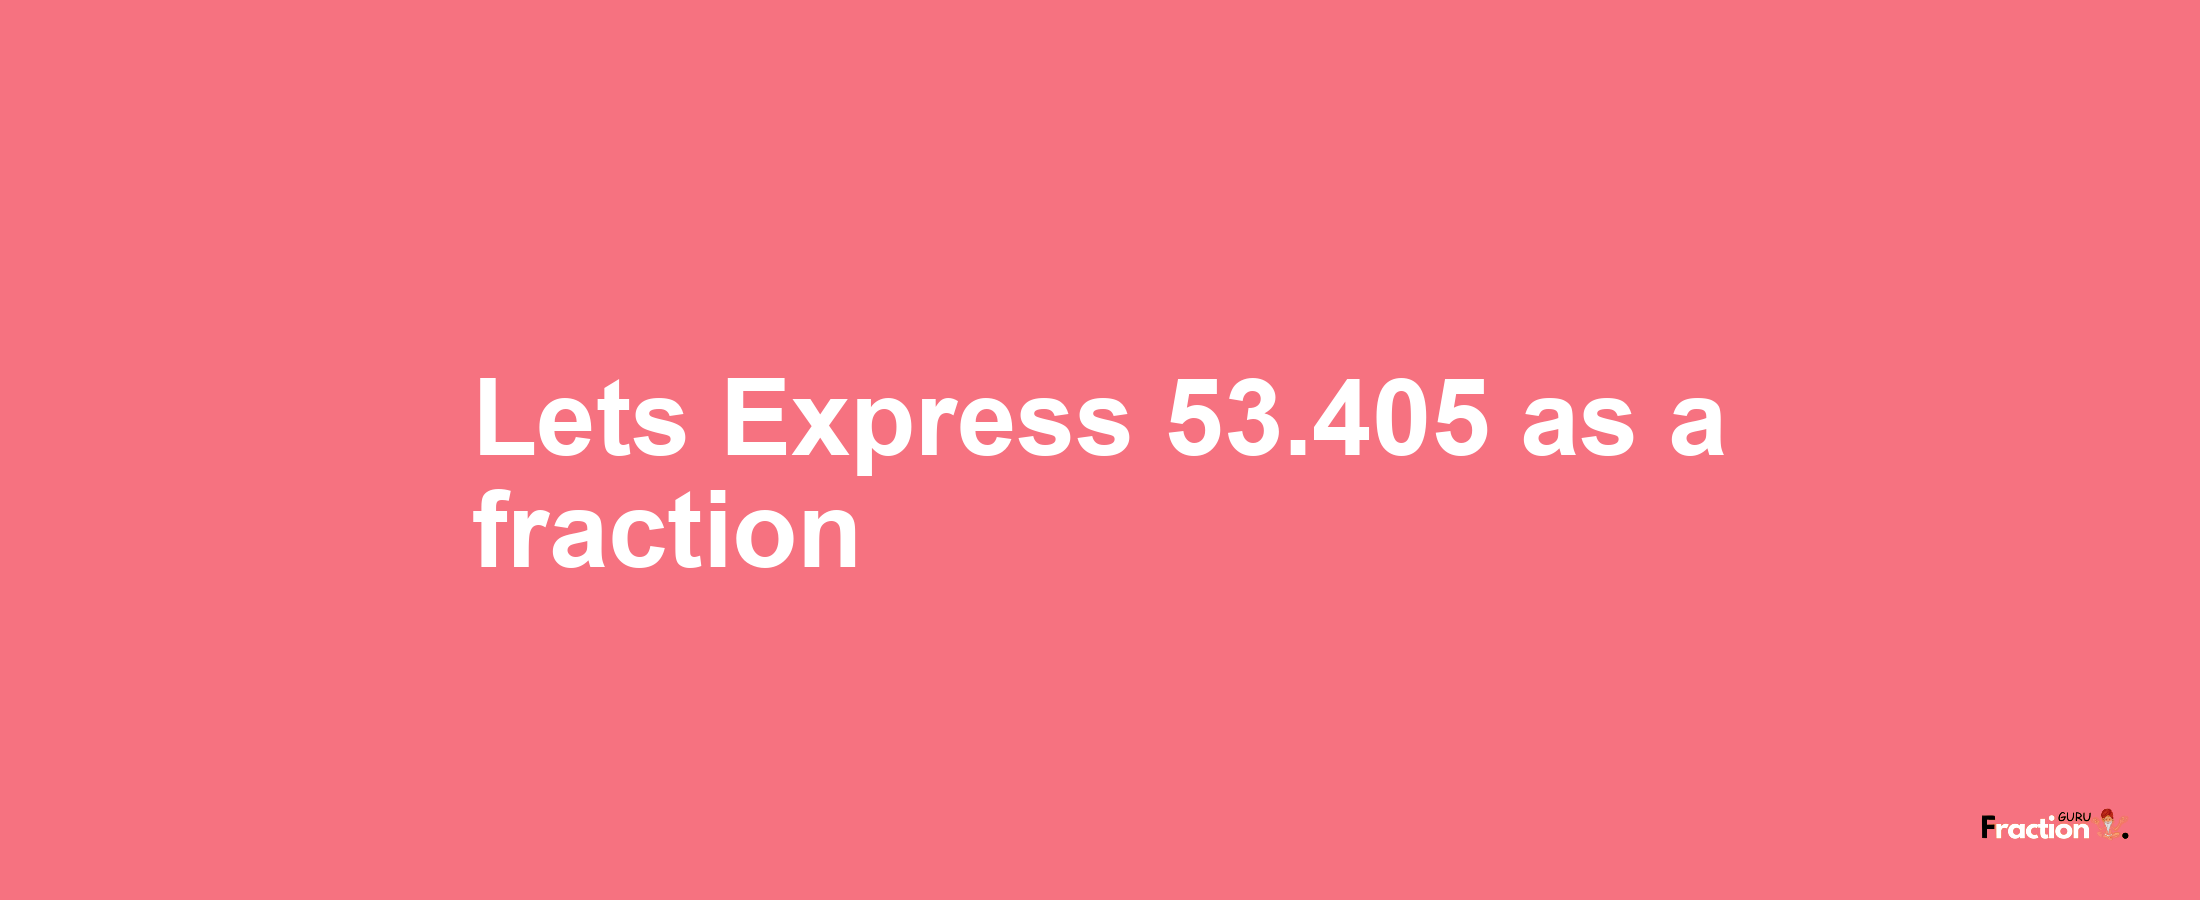 Lets Express 53.405 as afraction